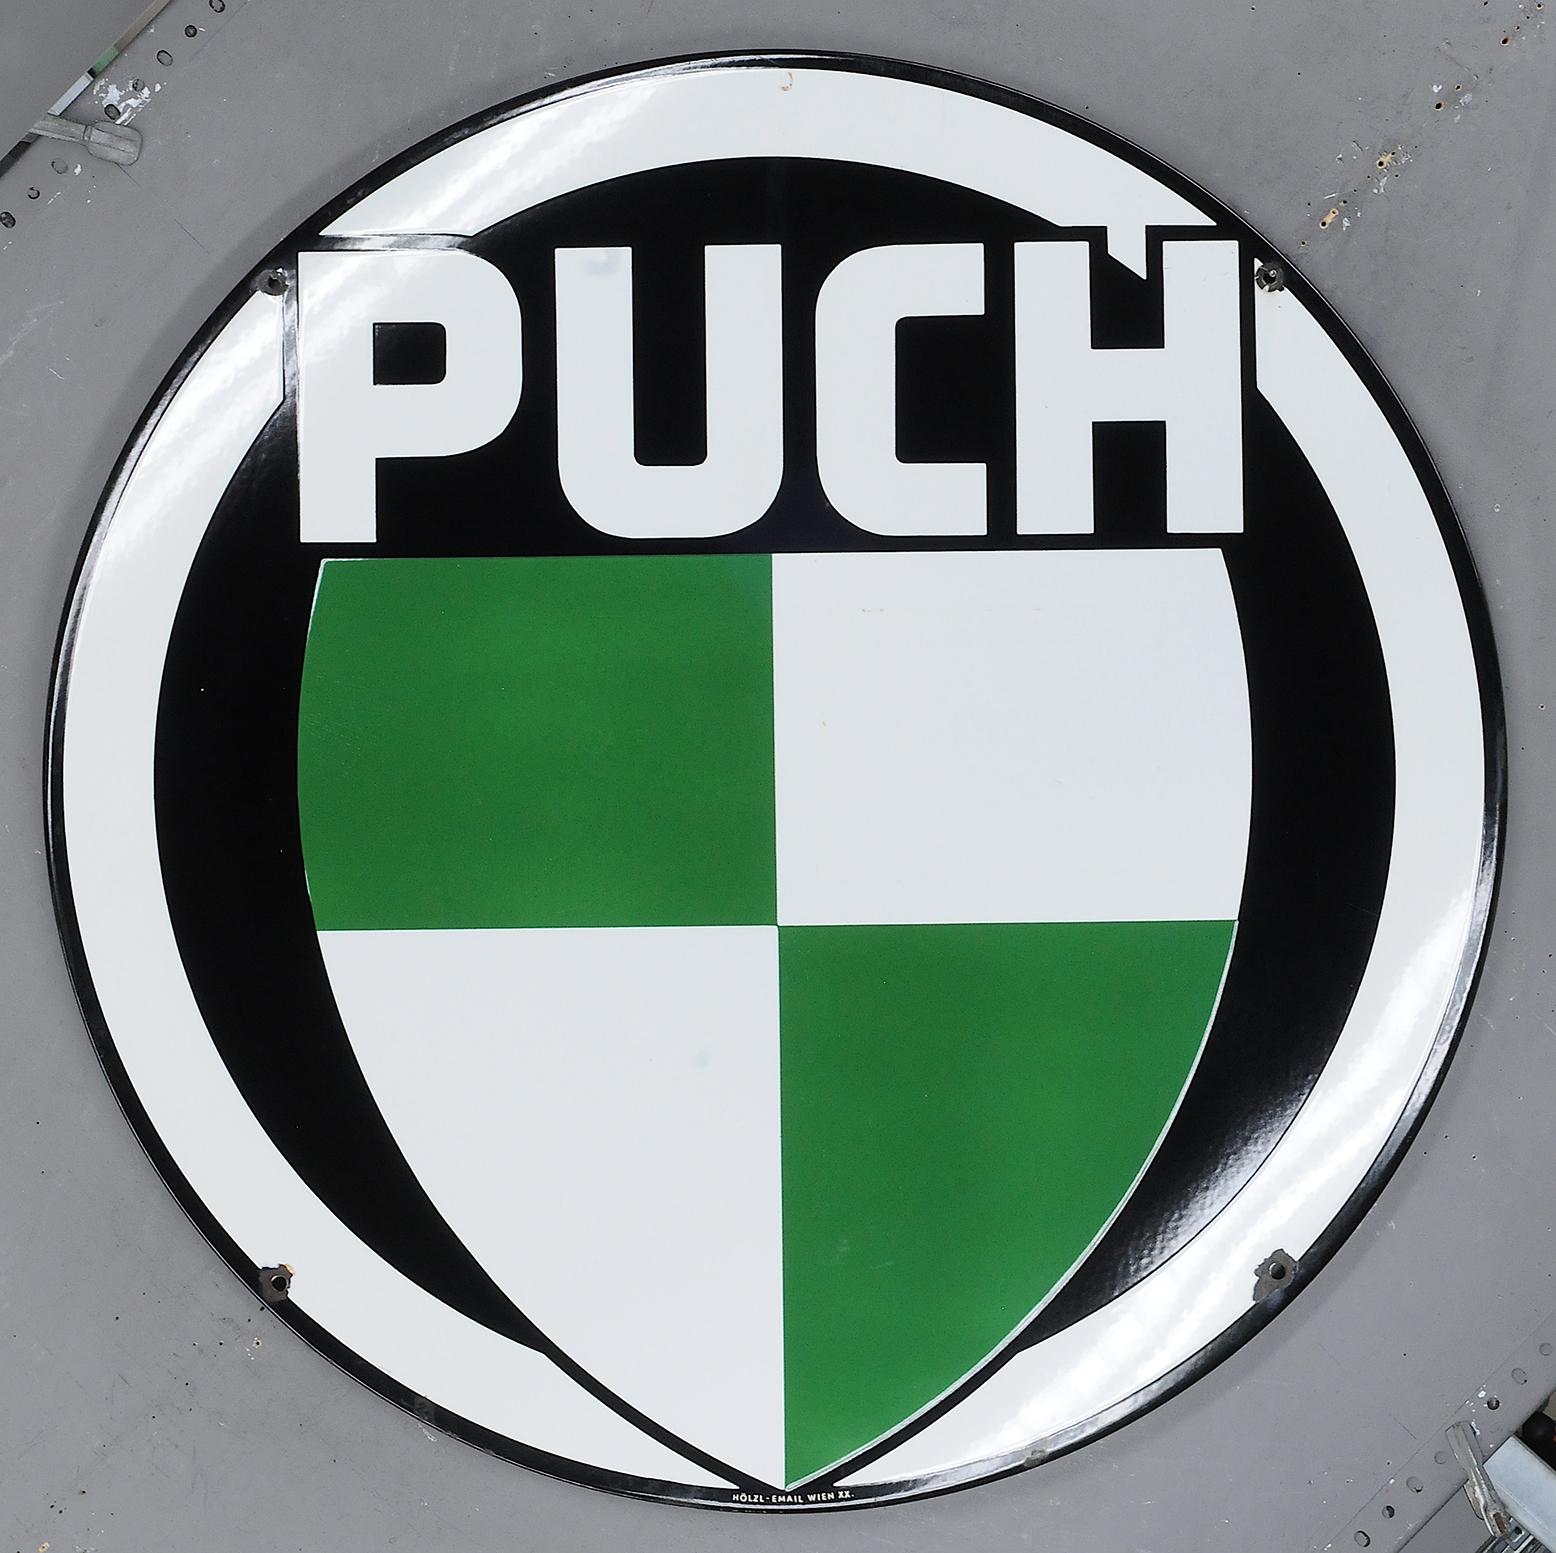 Puch - Image 3 of 3